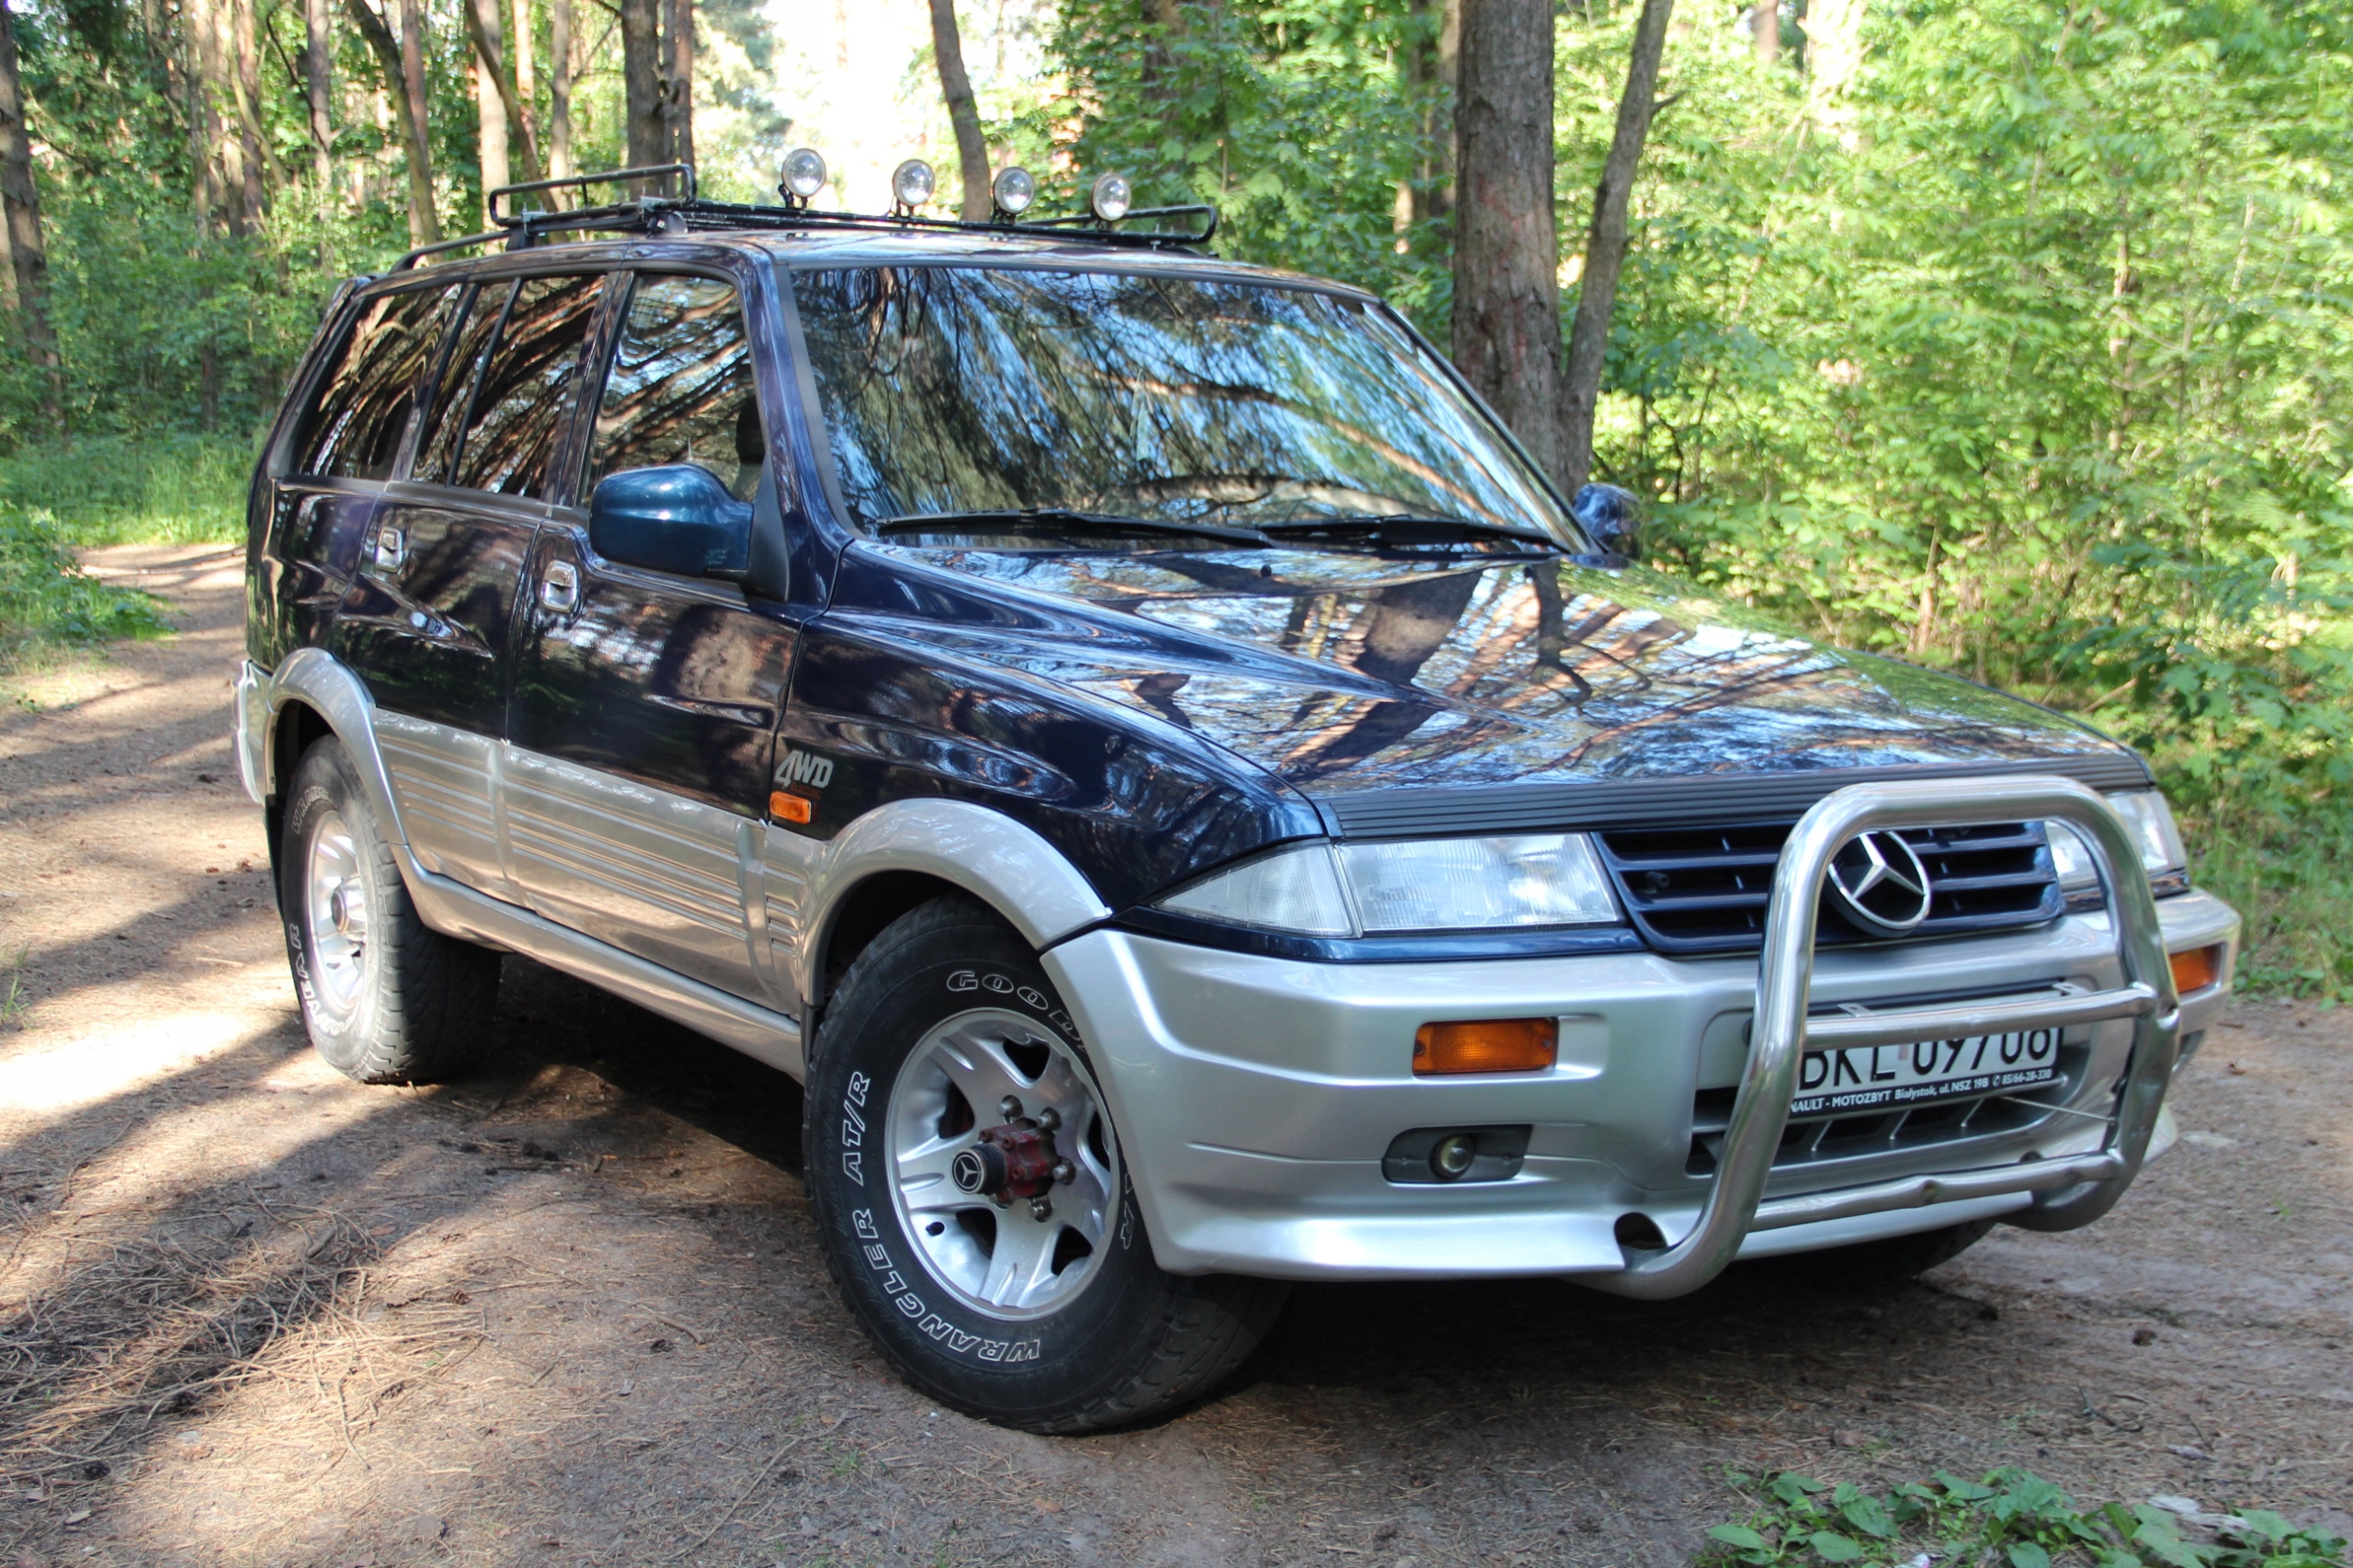 Саньенг 2.9. Санг енг Муссо. SSANGYONG Musso 4x4. SSANGYONG Musso 1. Musso 2.